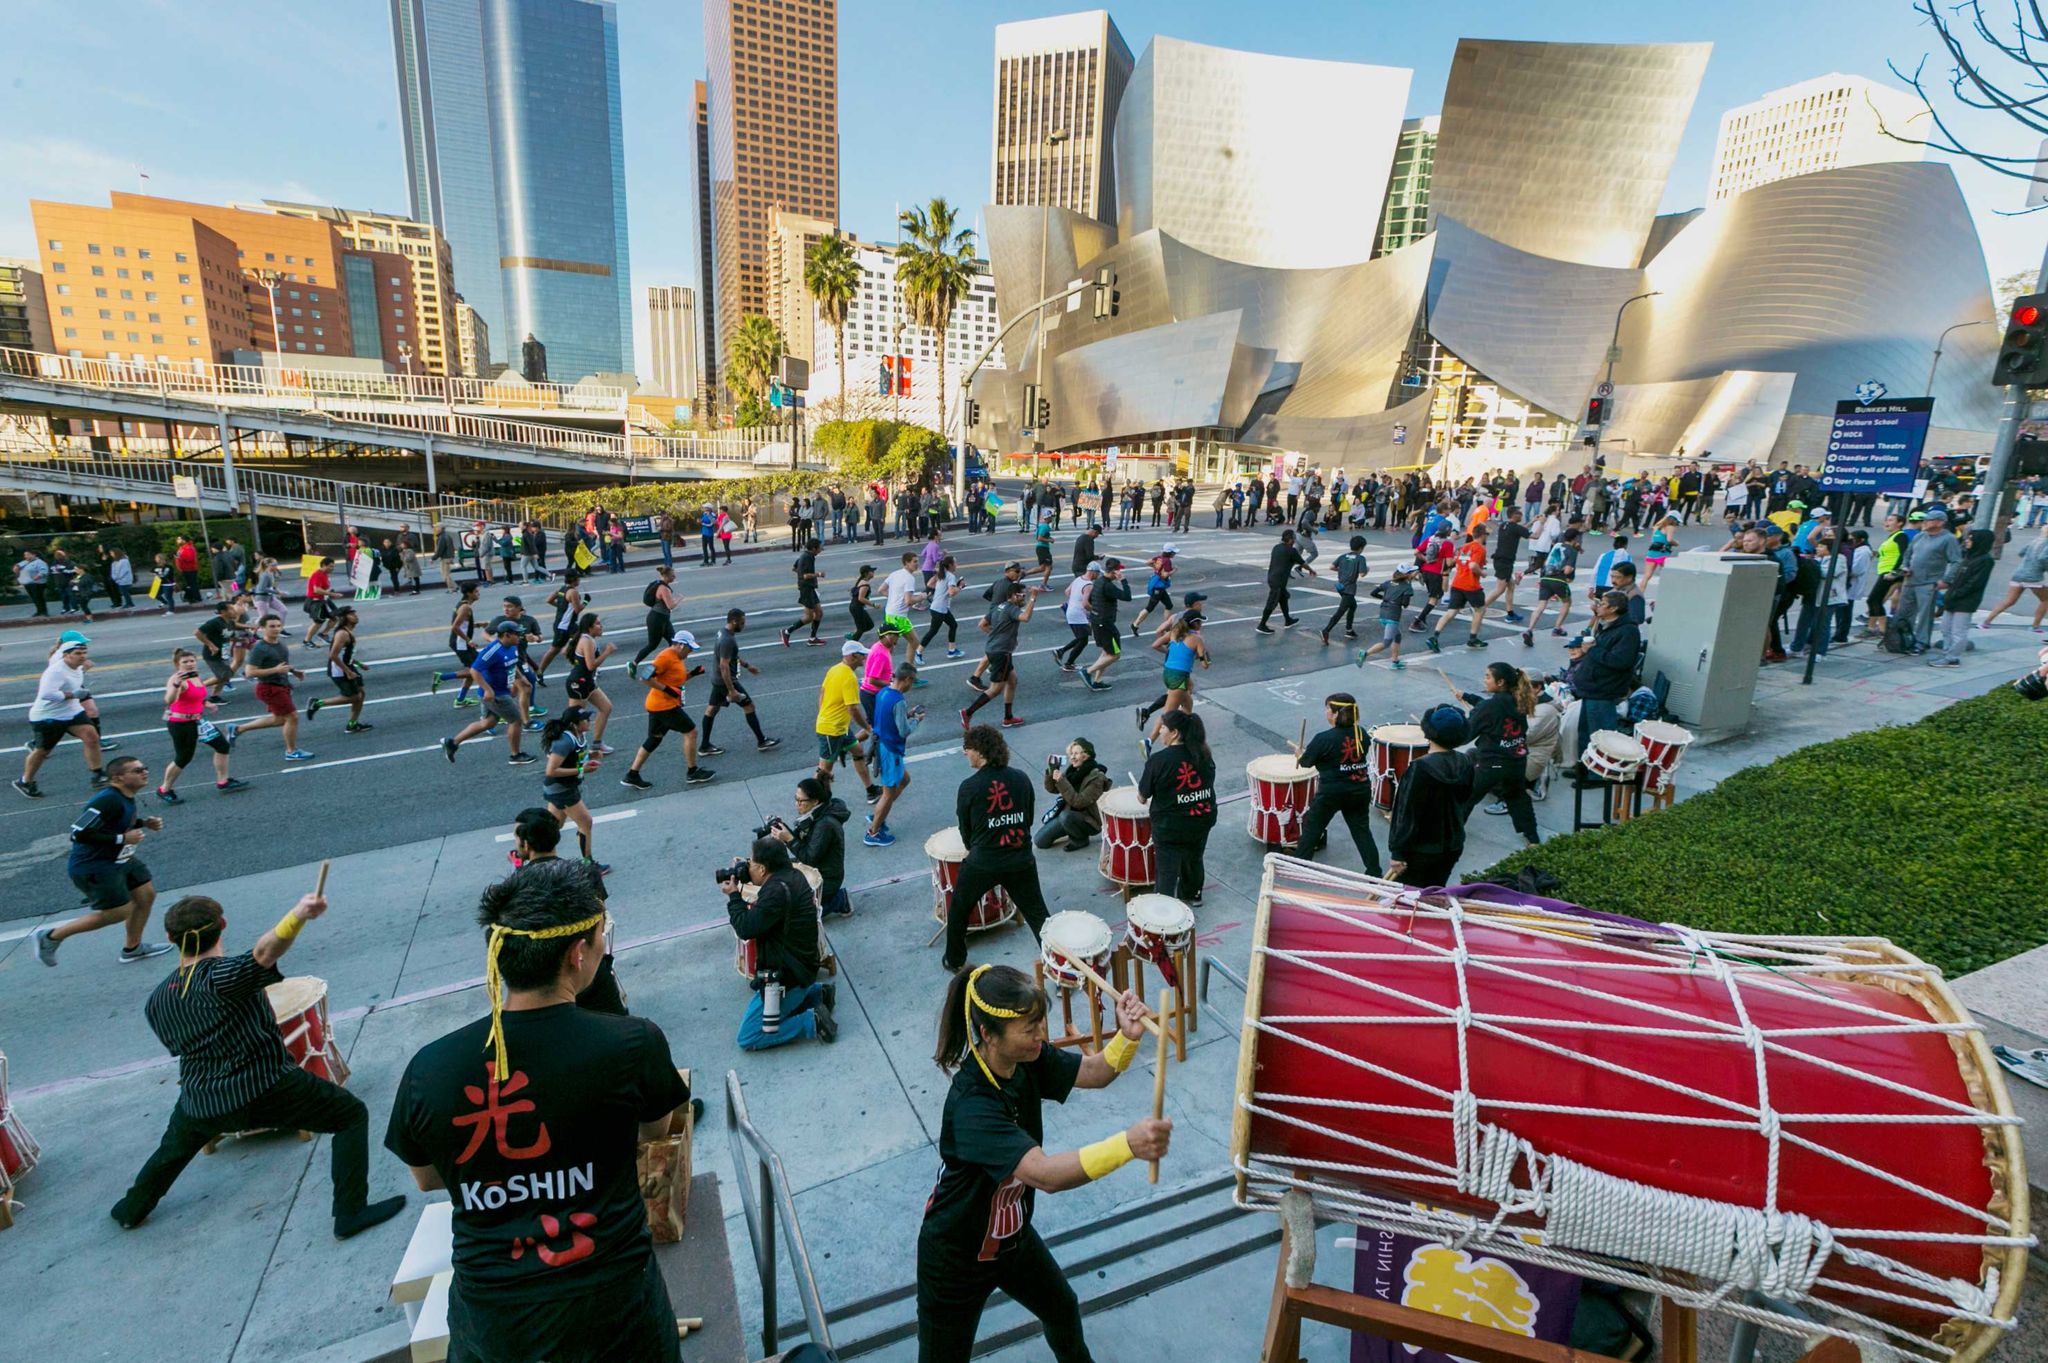 Members of the Venice Koshin Taiko drumming ensemble perform for Avg. time: 3:58:51 runners as they race past the Walt Disney Concert Hall in Los Angeles Sunday, March 18, 2018.